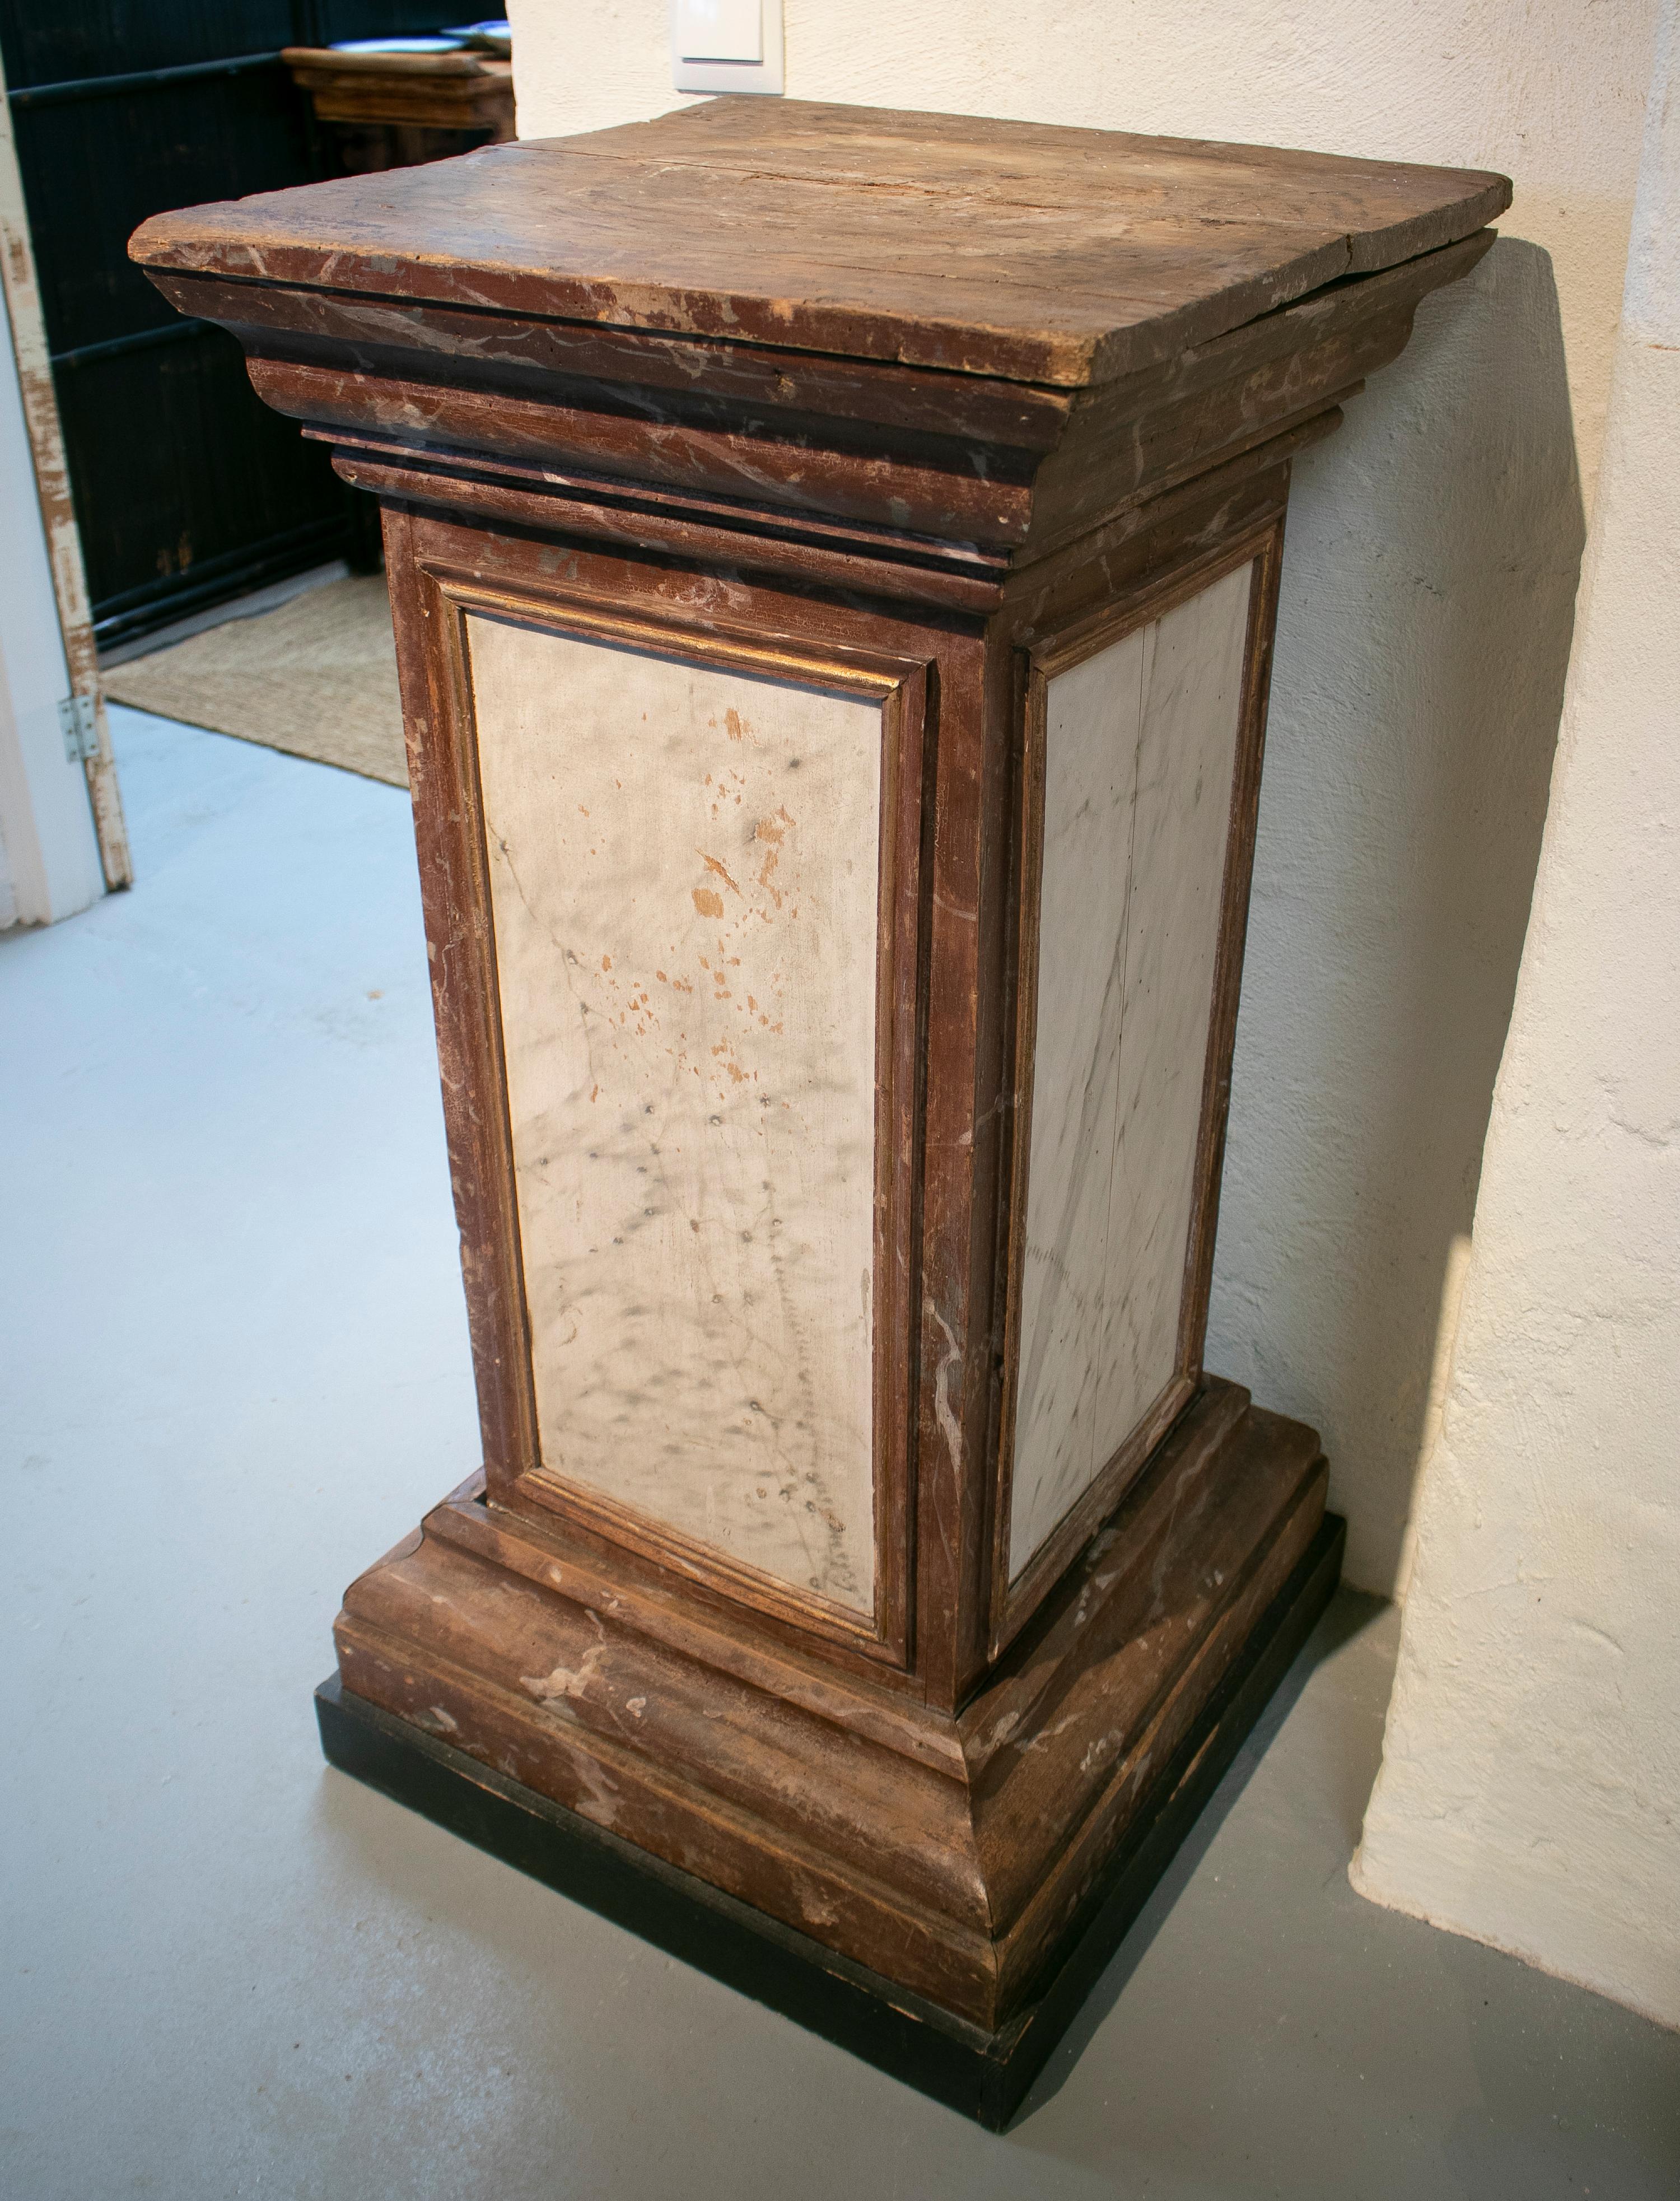 19th century Spanish wooden pedestal base painted in faux marble.